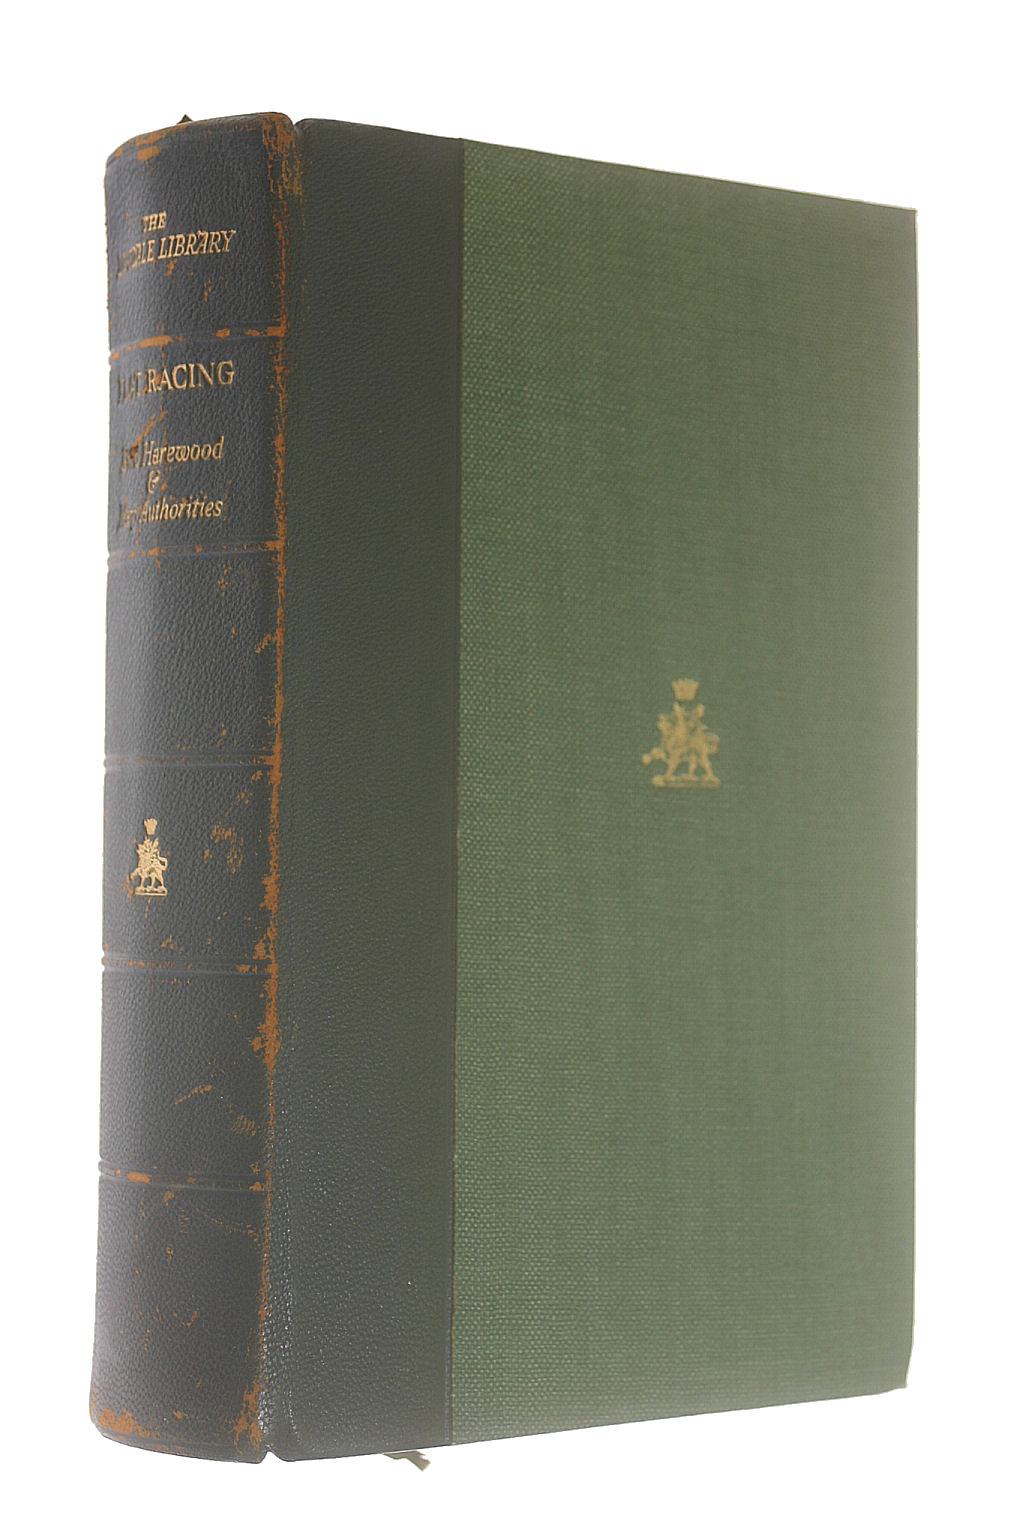 RT HON THE EARL OF HAREWOOD AND LTCOL P.E. RICKETTS (EDS) - The Lonsdale Library Vol. XXVIII FLAT RACING